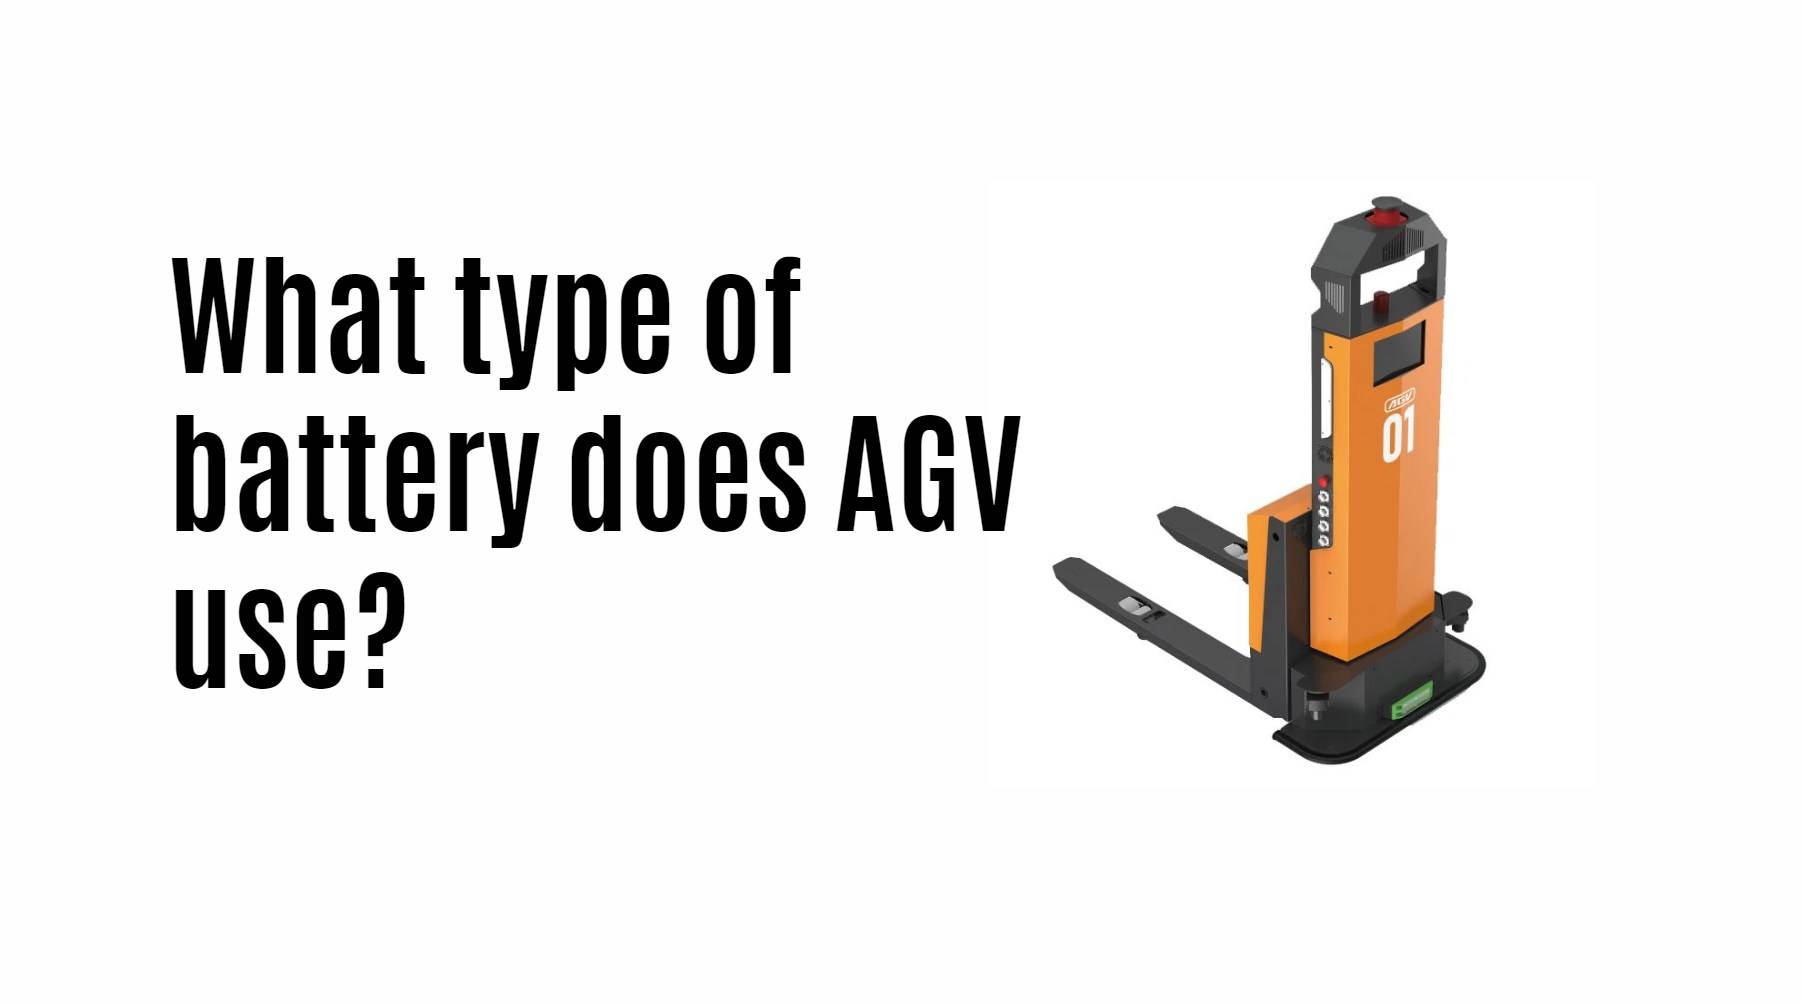 What type of battery does AGV use?